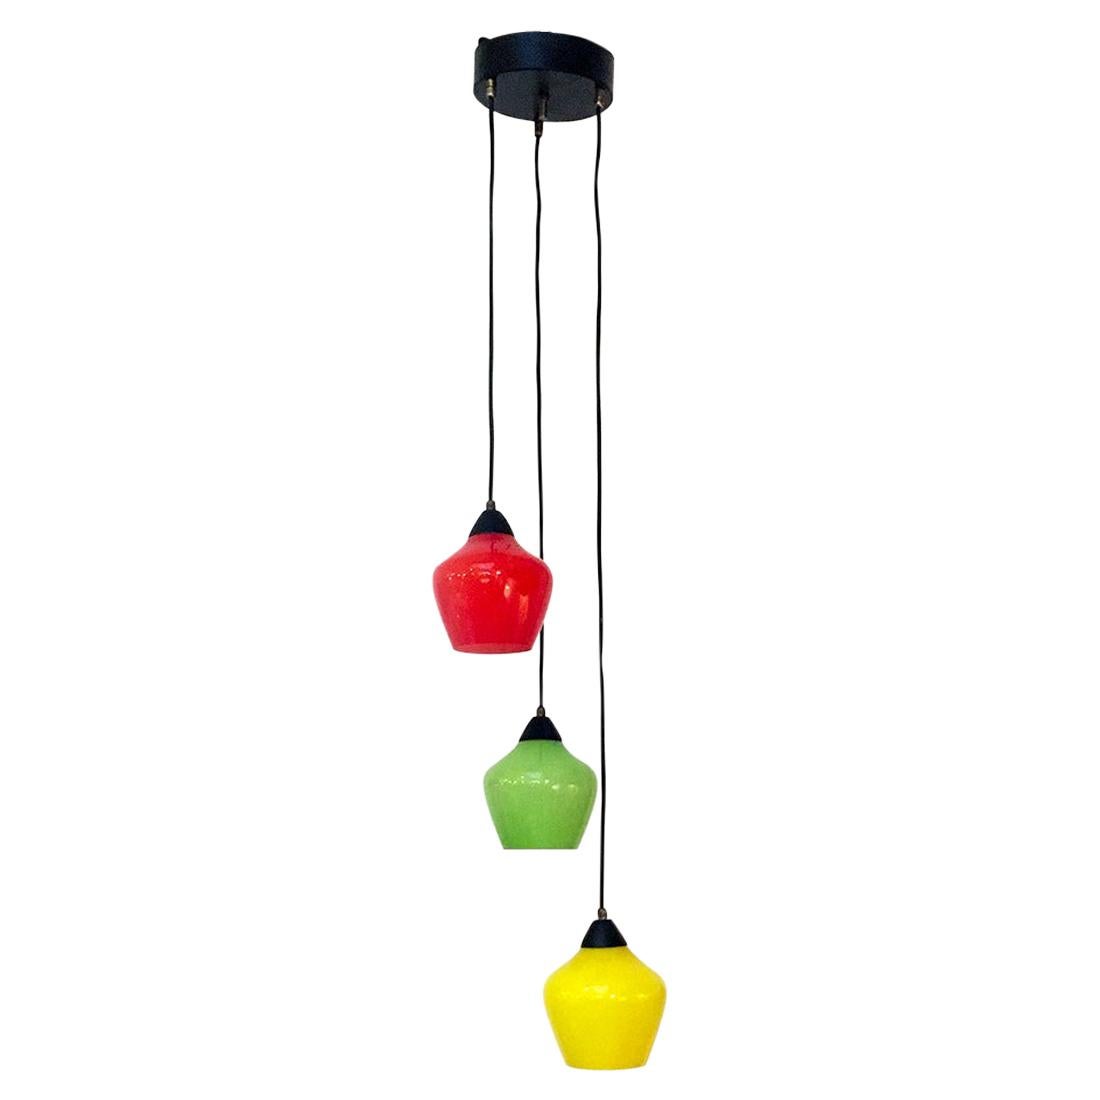 Italian Mid-Century Modern Three-Light Chandelier with Colored Glass, 1950s